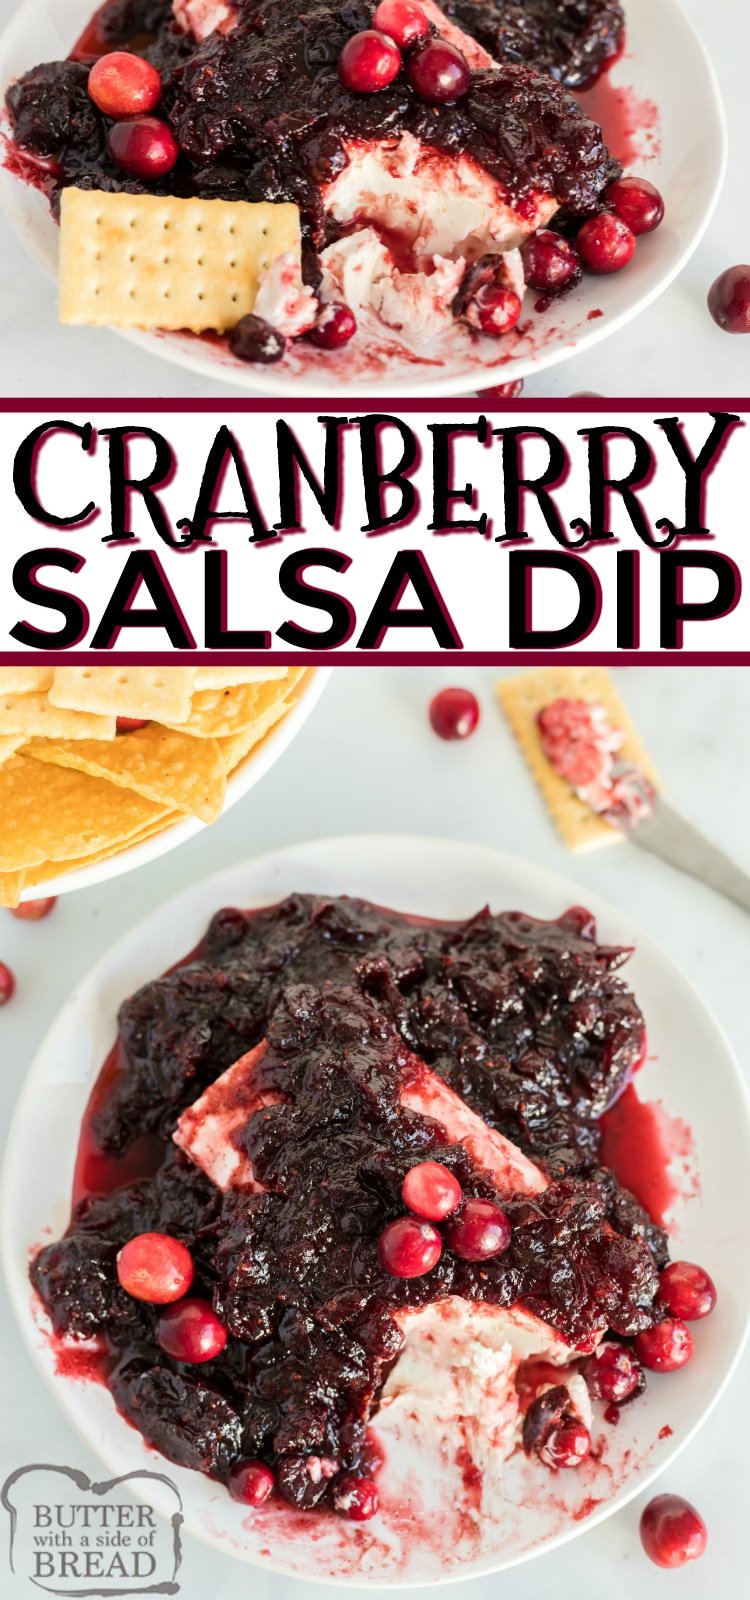 Cranberry Salsa Dip is made with cranberries, sugar and spices, and then poured over cream cheese to make a delicious holiday appetizer recipe. This simple dip recipe is perfect for parties and goes well with chips and crackers.